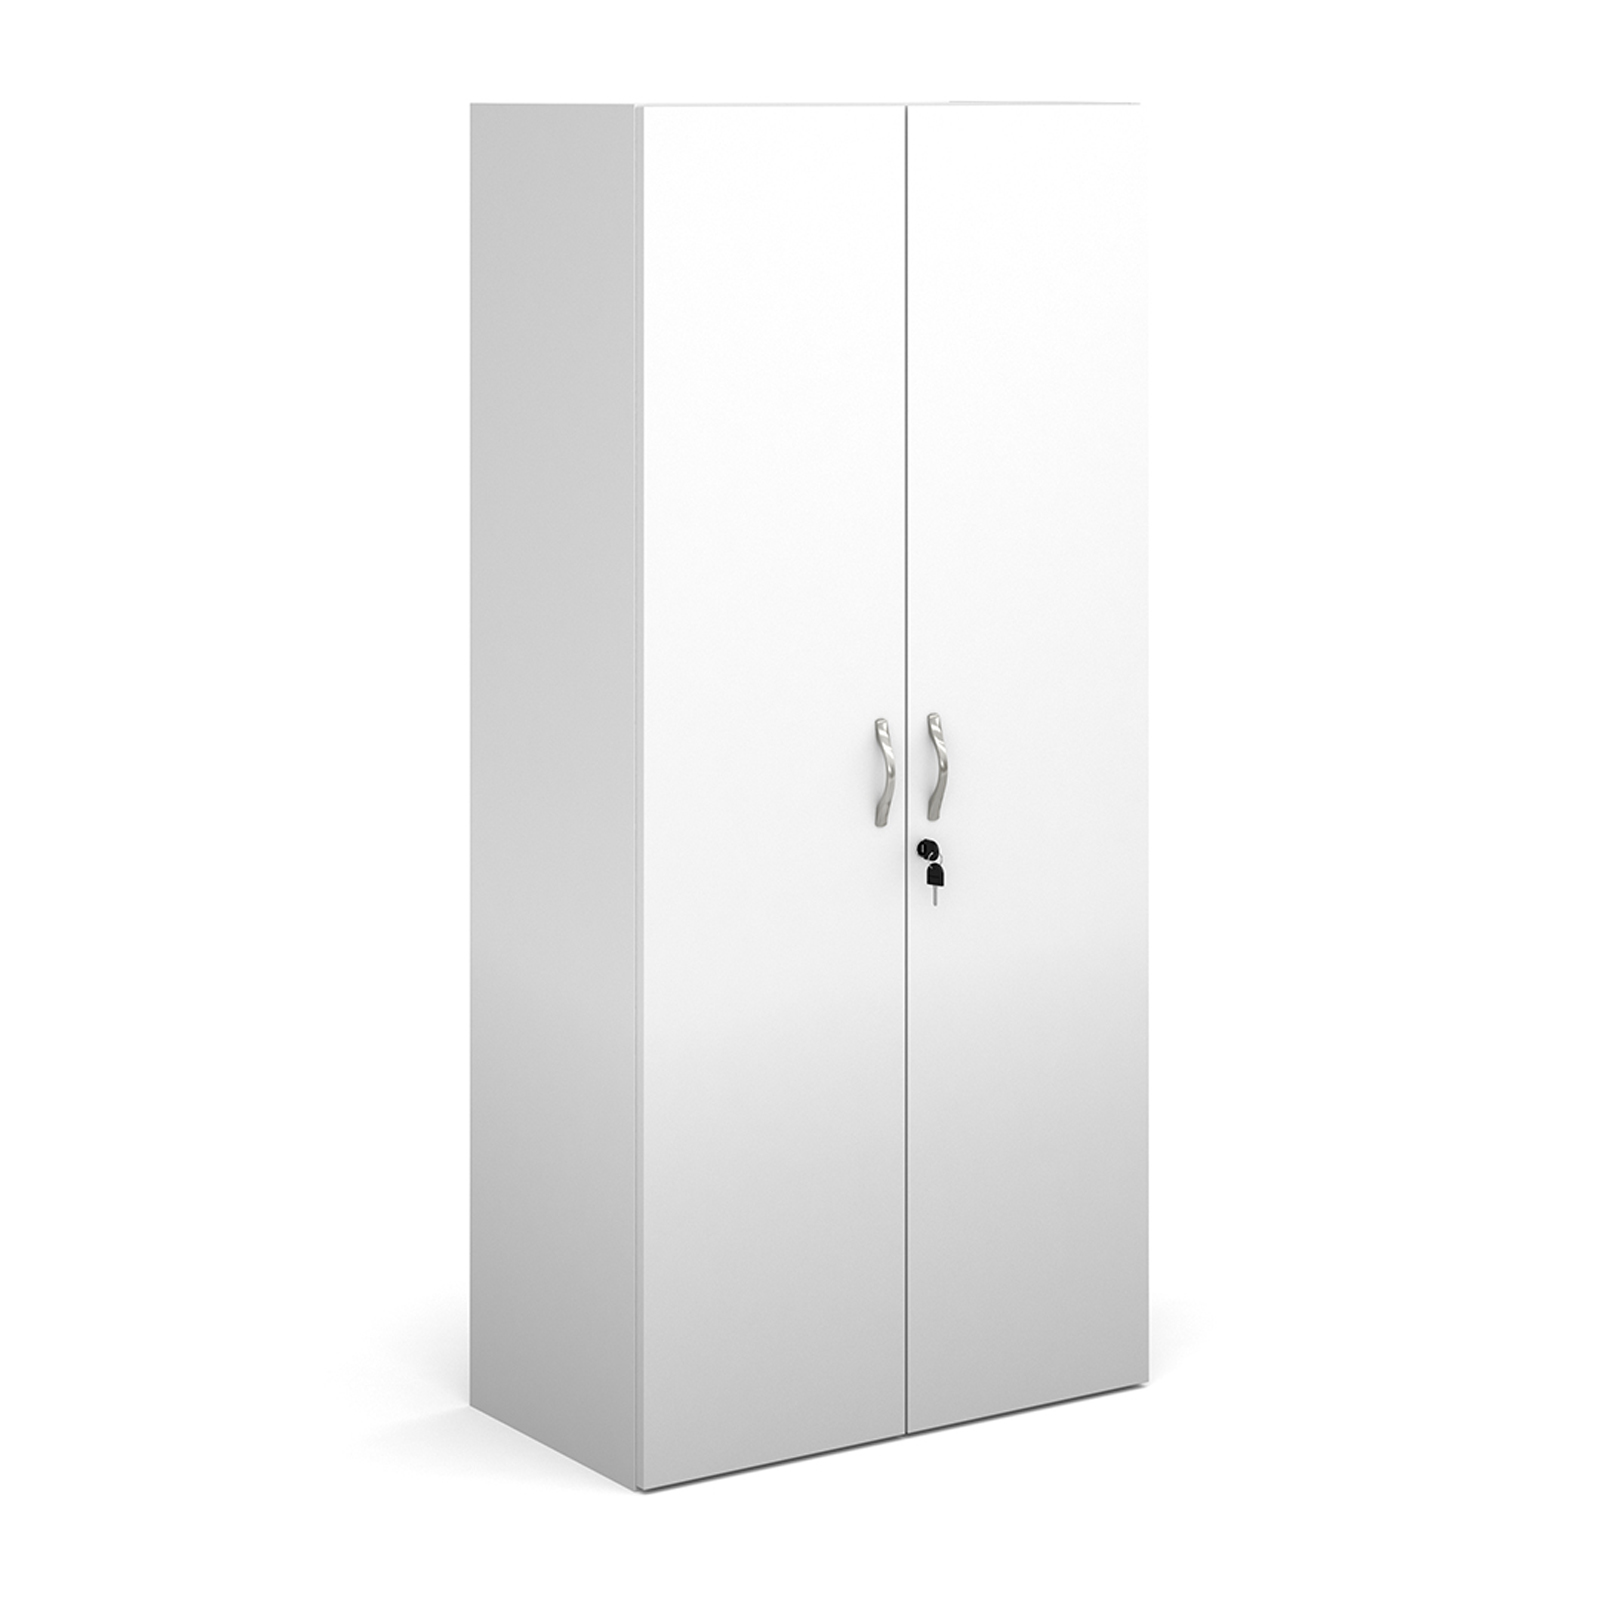 Value Line Classic+ Double Door Office Cupboards, 3 Shelf - 76wx39dx163h (cm), White, Fully Installed